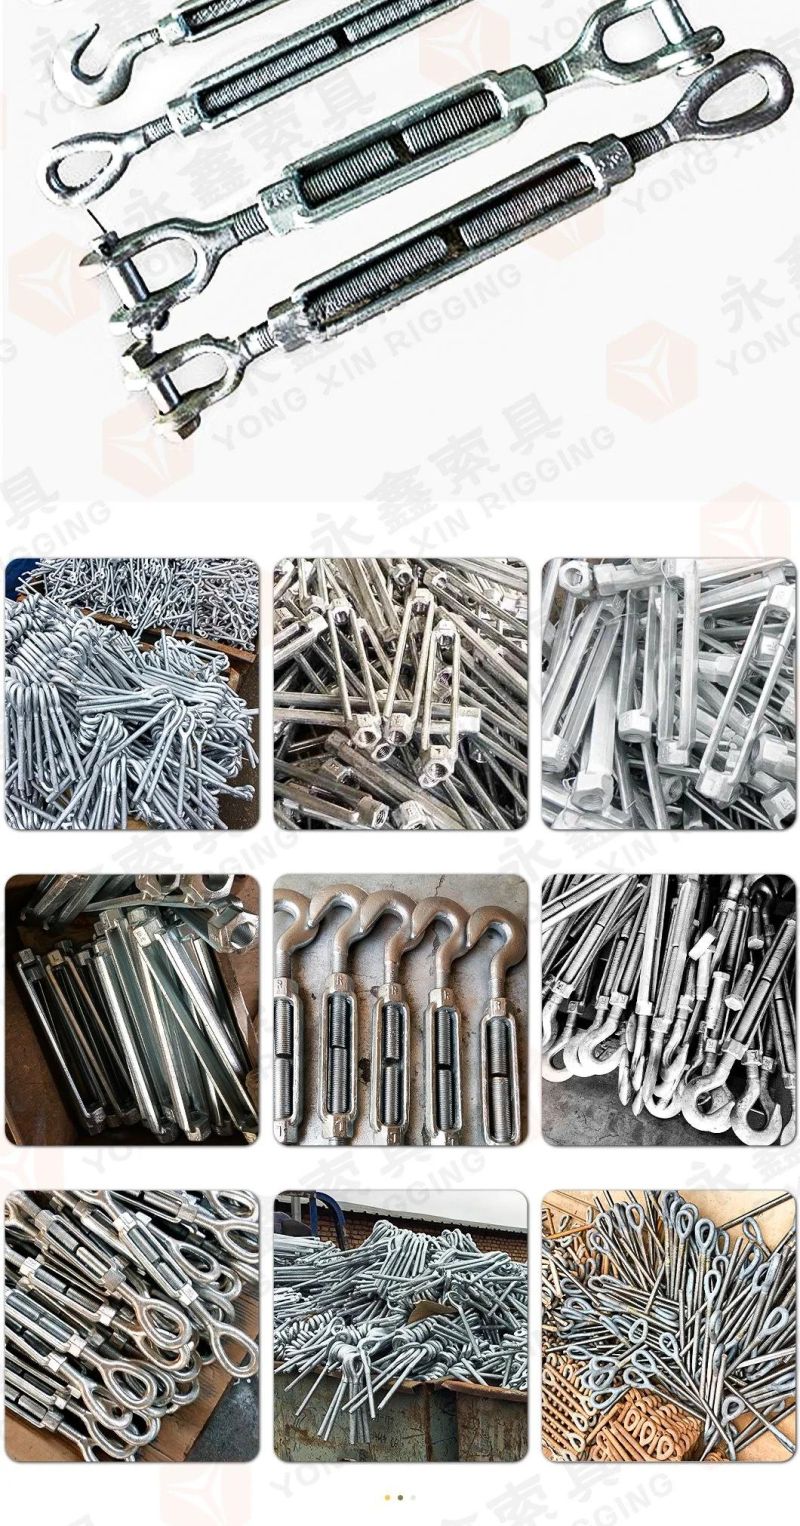 Stainless Steel AISI304/316 Open Body Turnbuckles Eye and Hook Construction Size of 20mm Steel Turnbuckle